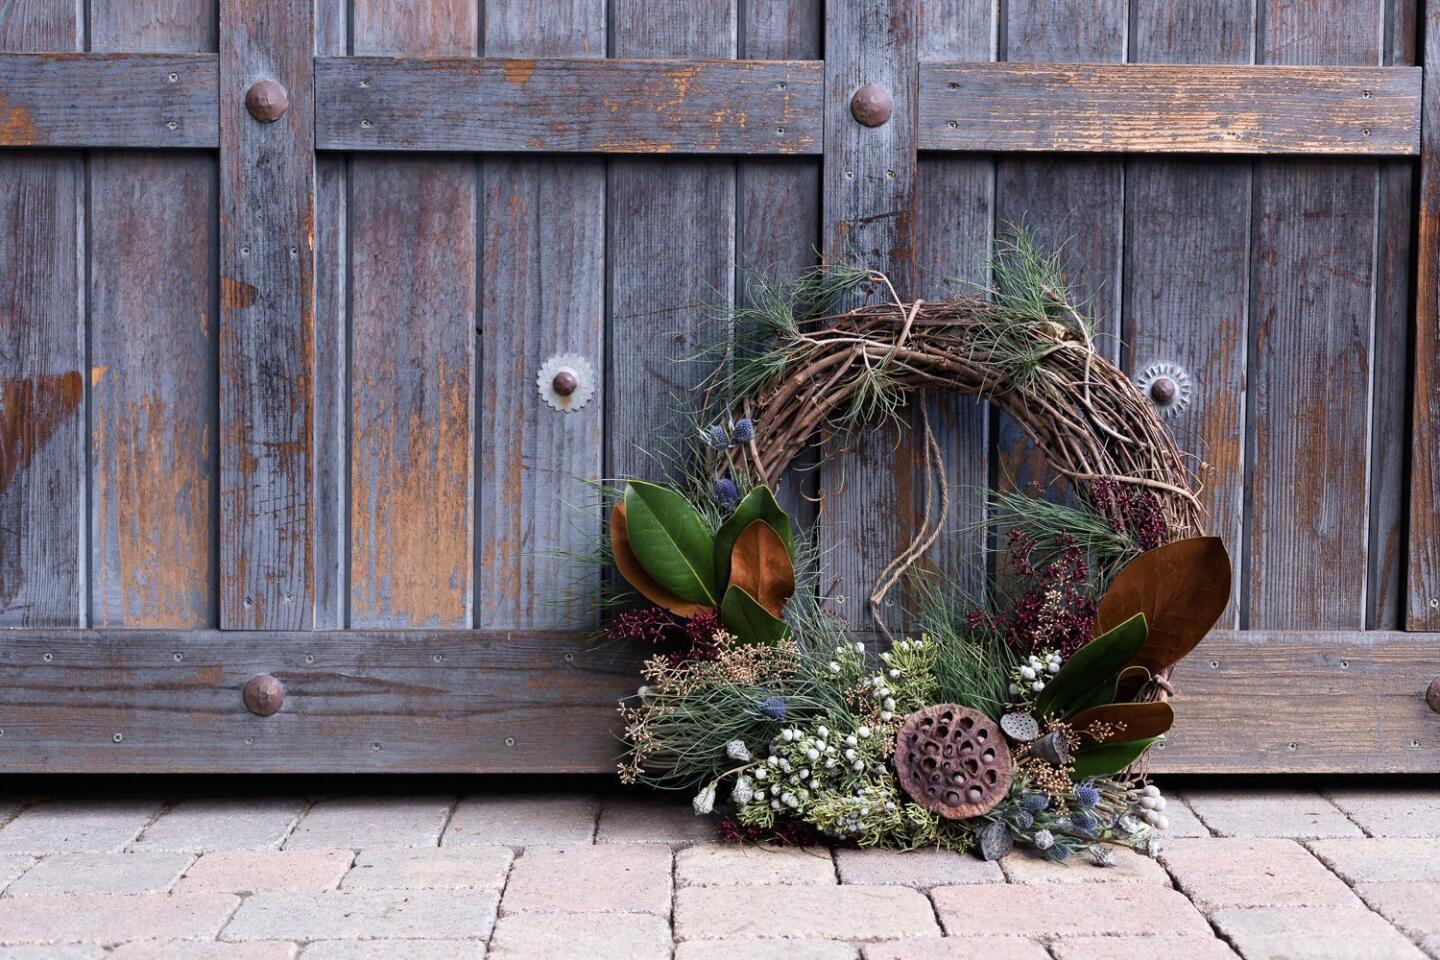 Make a holiday wreath to give -- and one to keep. Here's how: